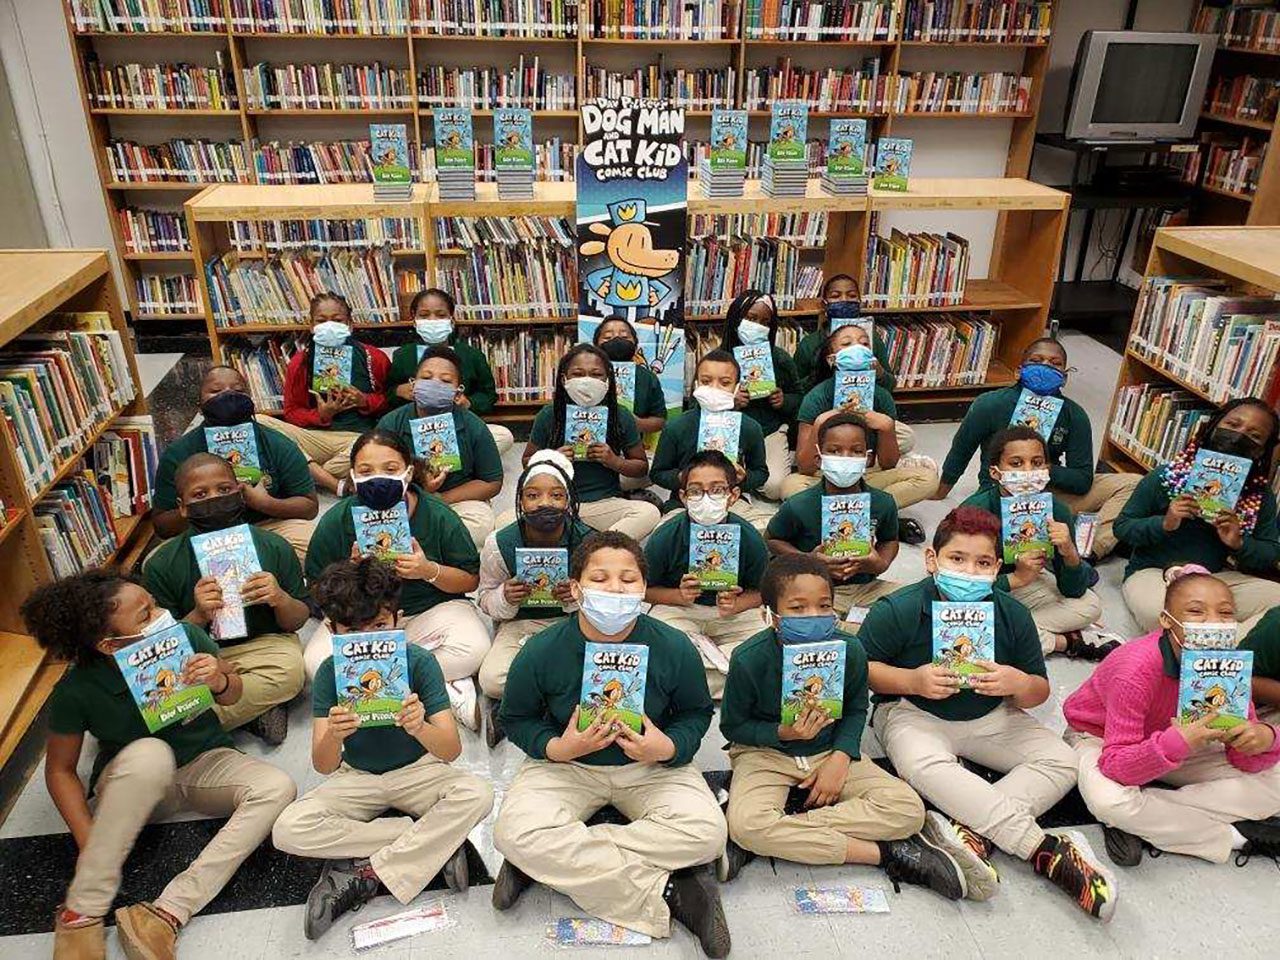 Students at Ivy Hill Elementary School excited about MVOL books